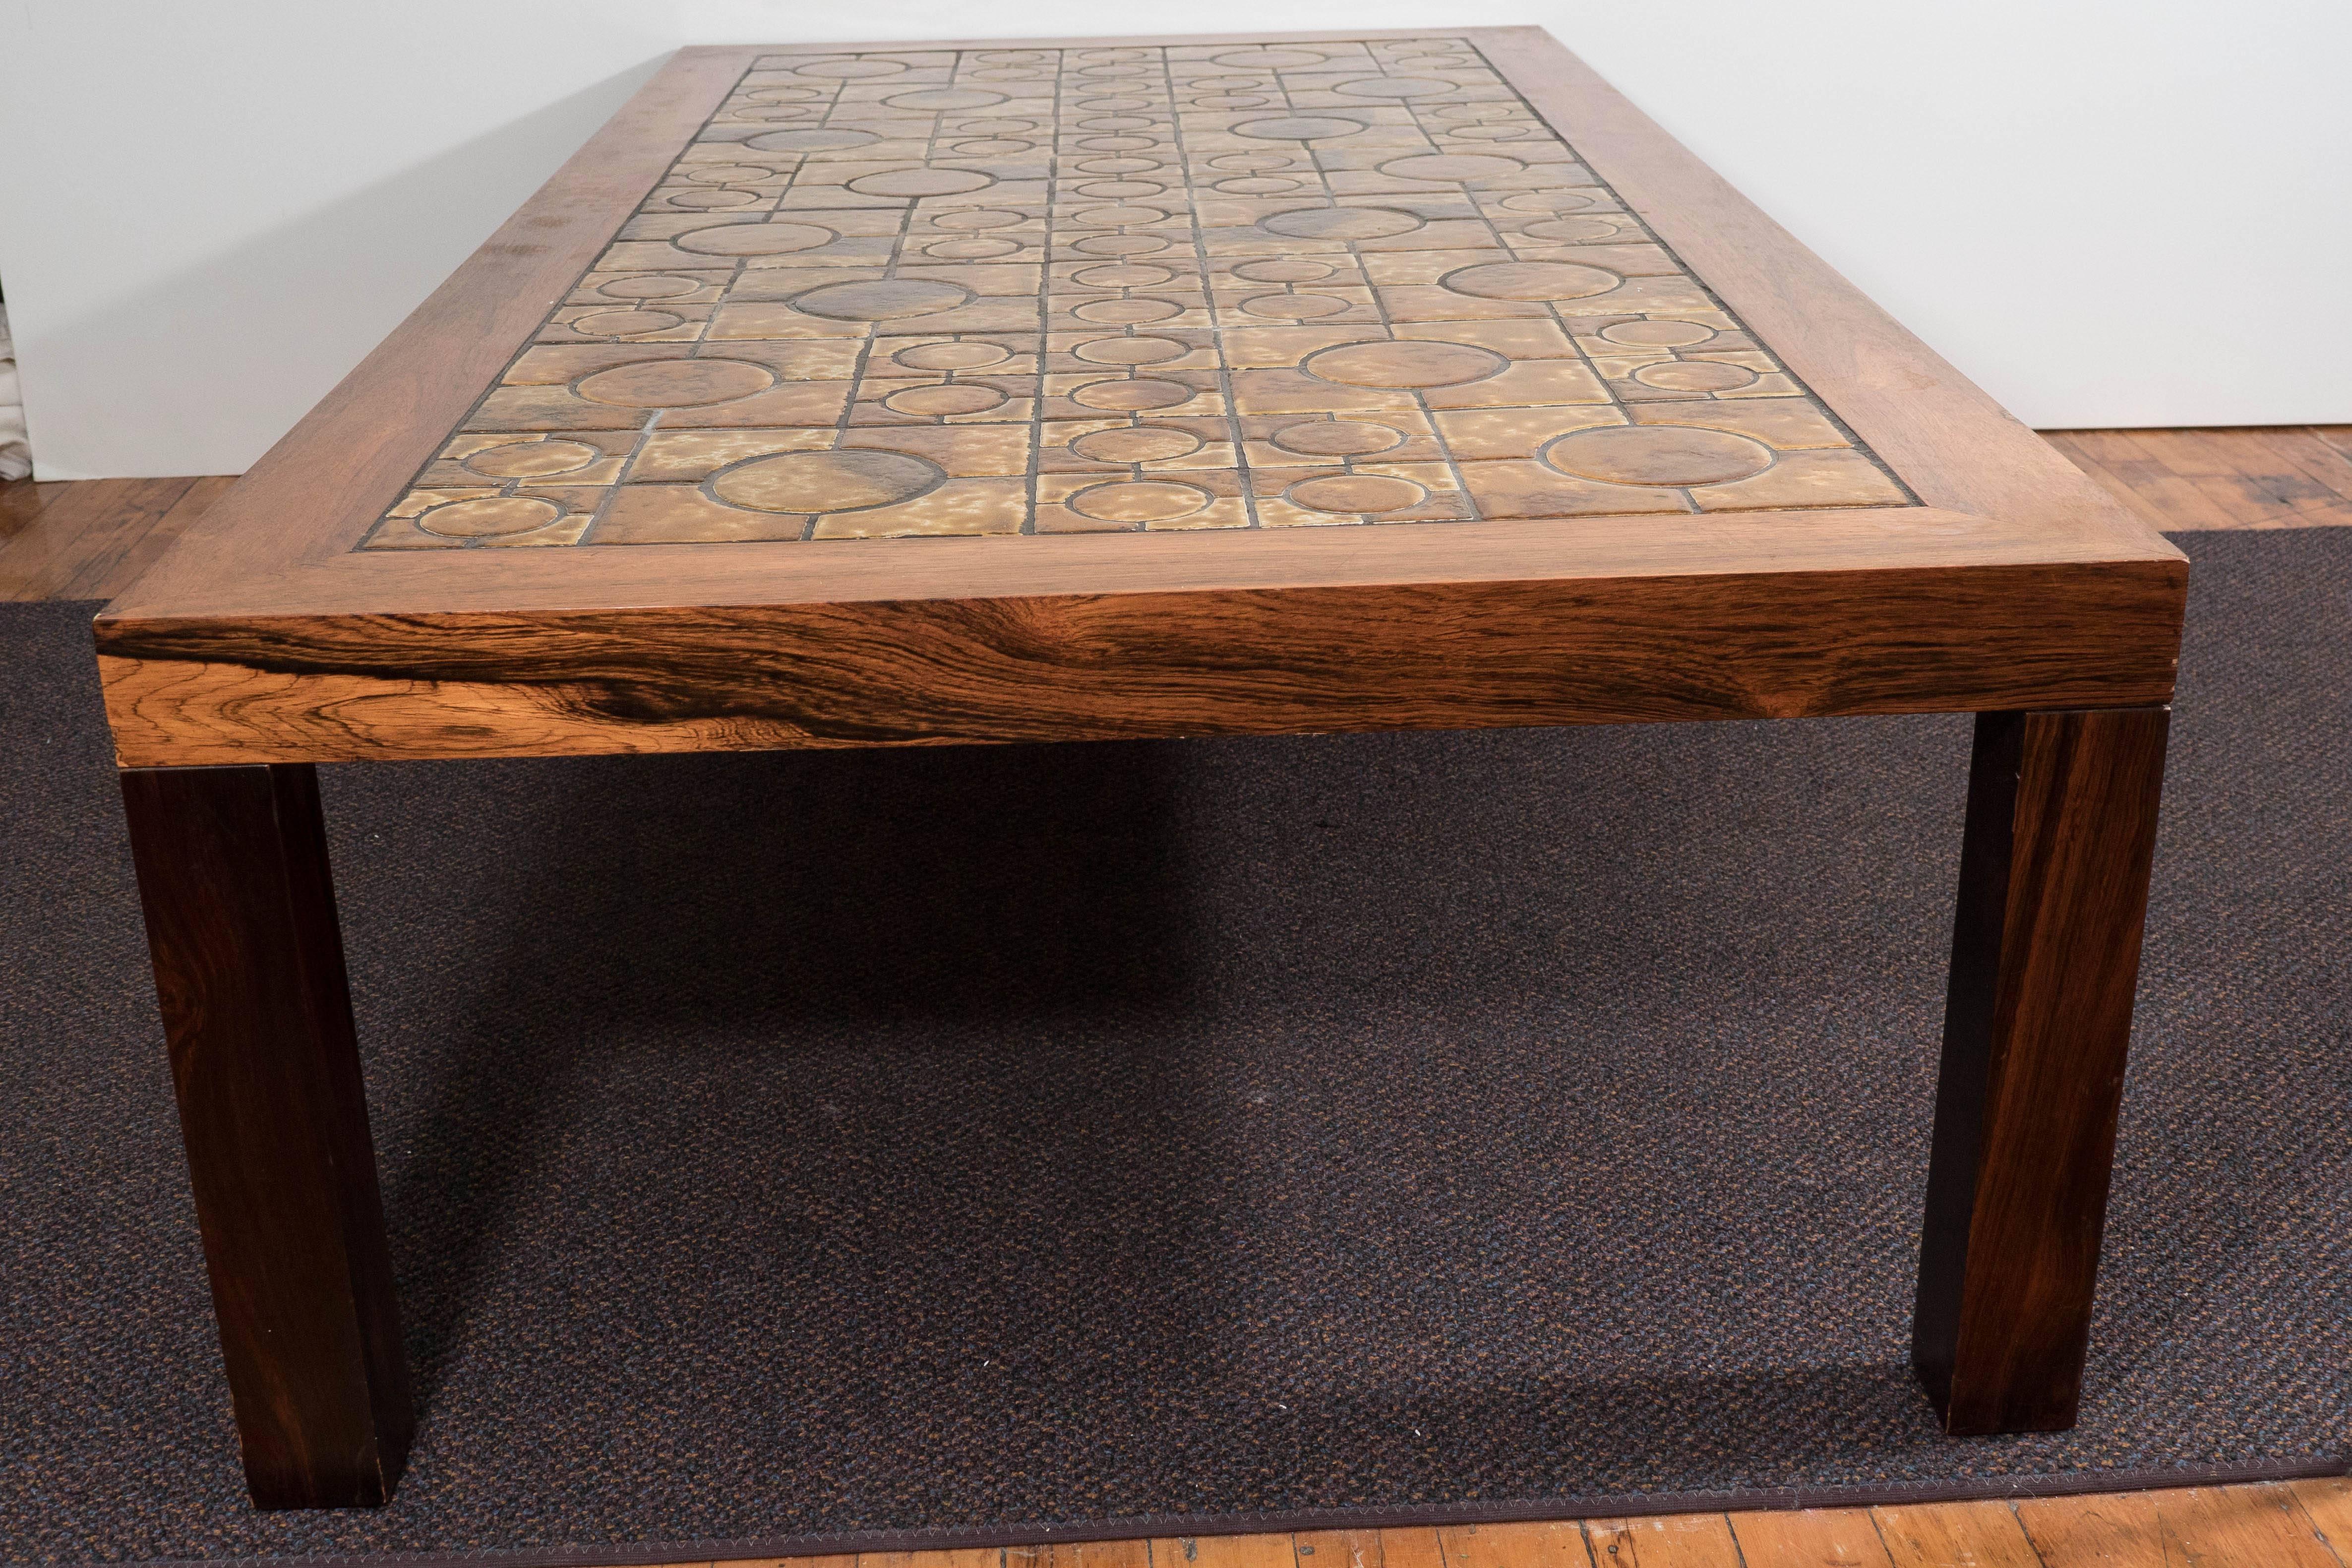 20th Century Danish Wooden Coffee Table with Clay Tile Top by Centrum Møbler